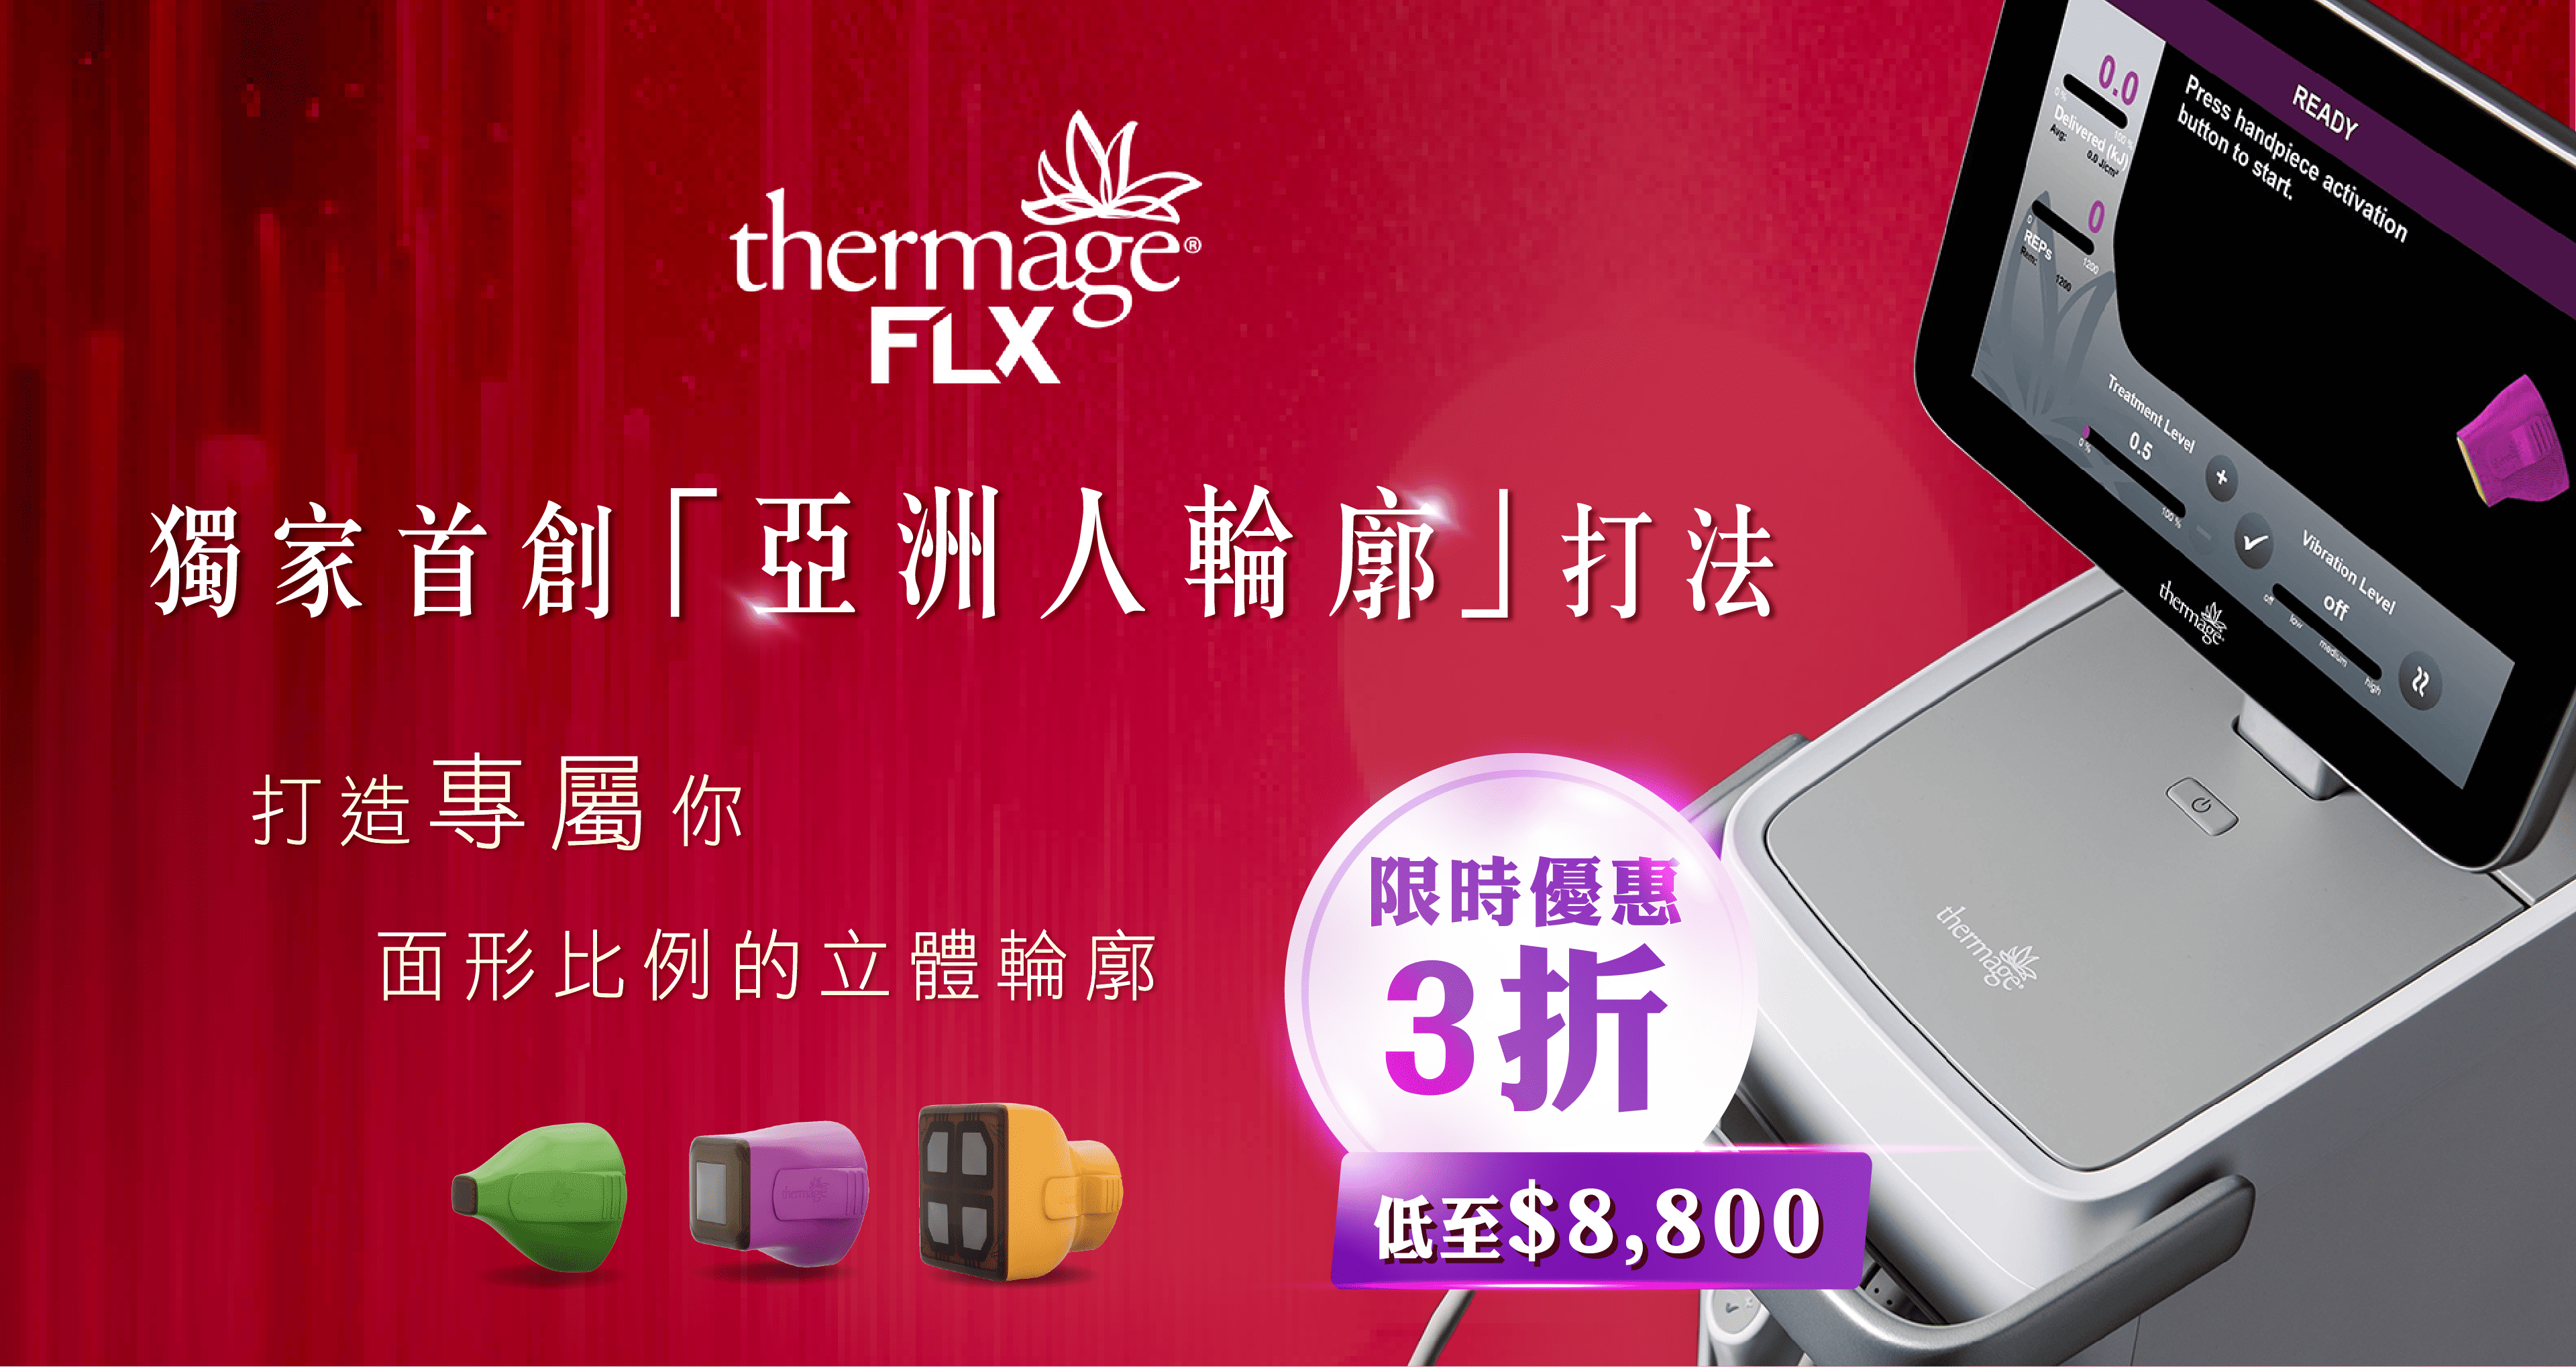 Thermage Bing ad